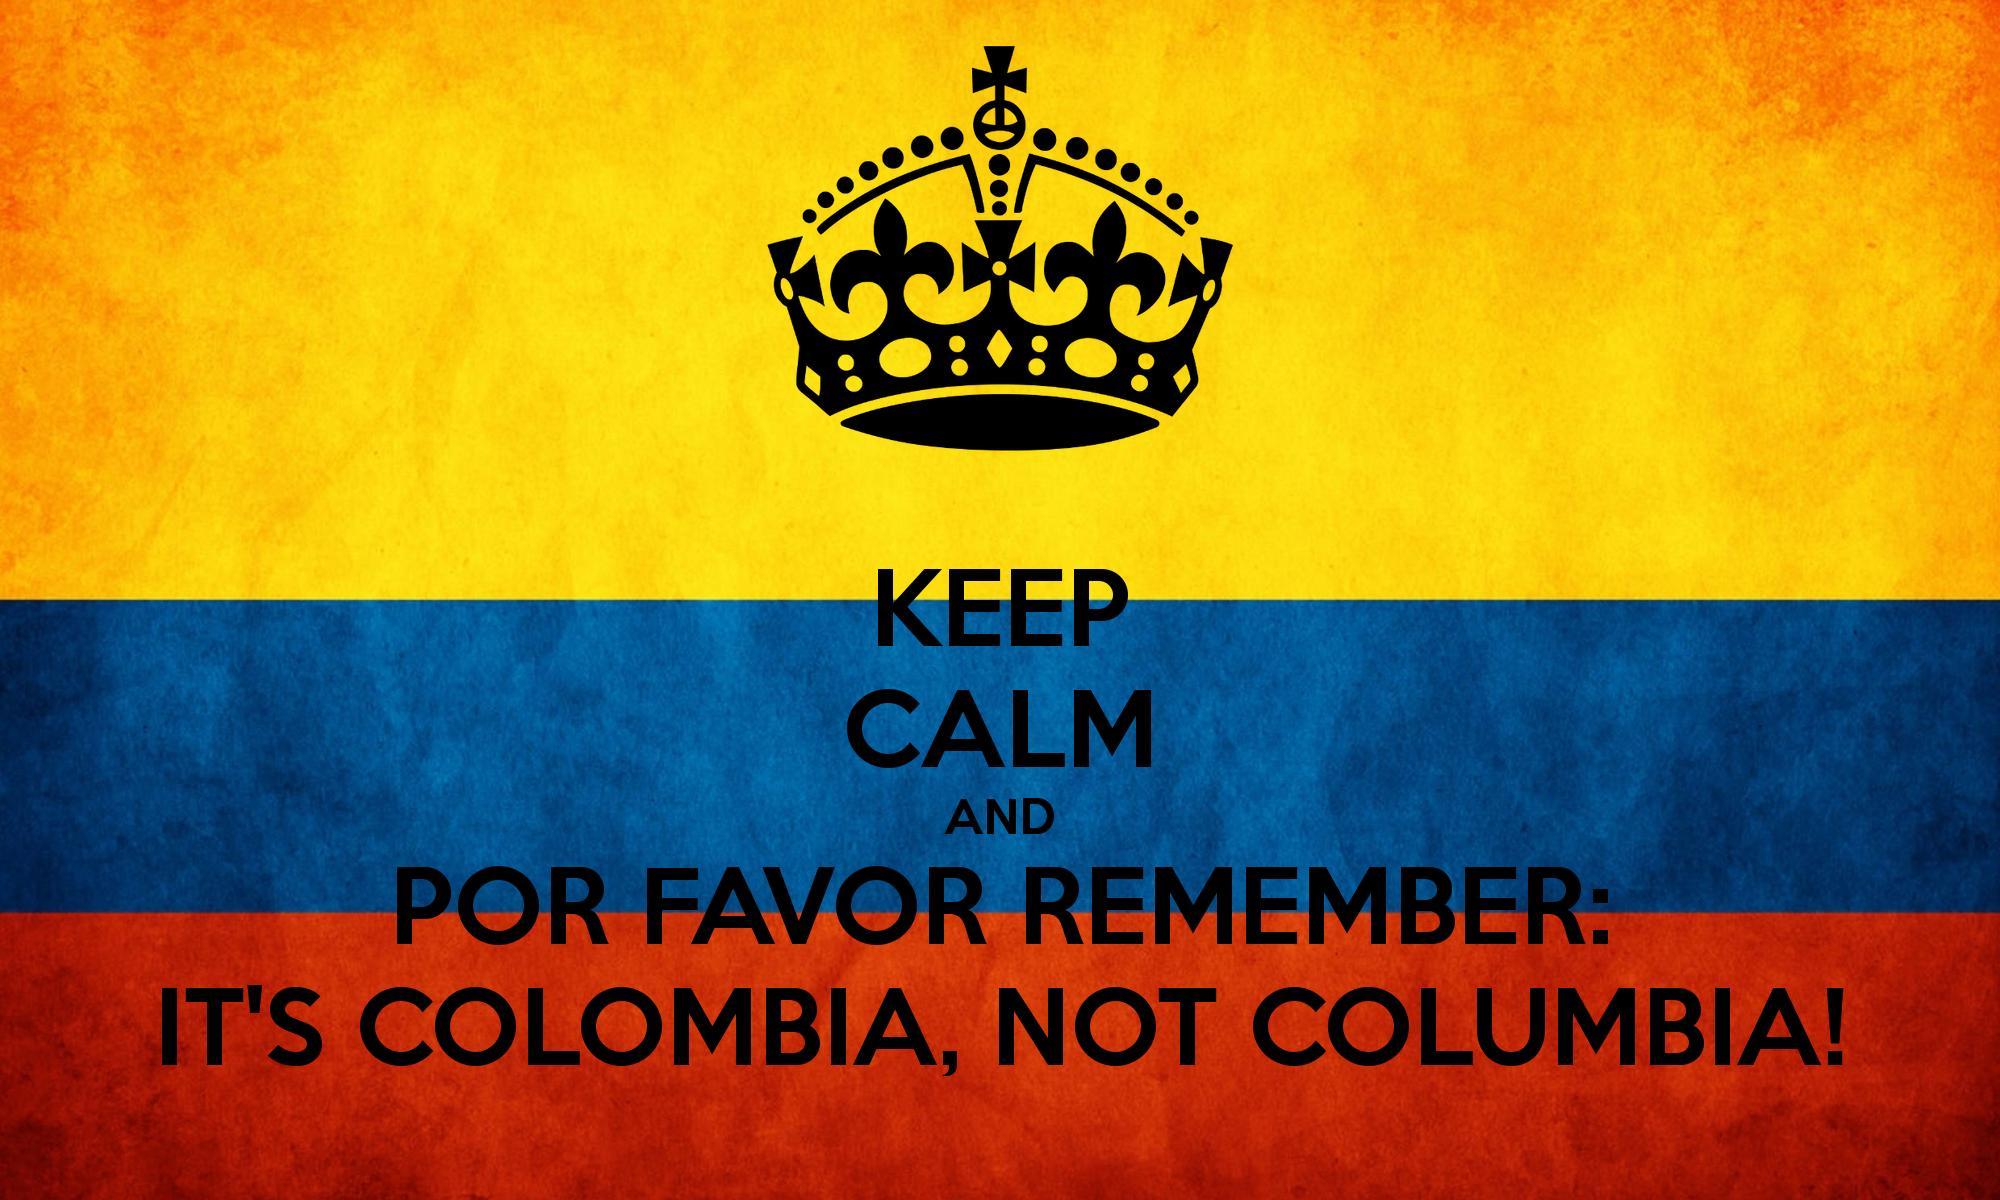 KEEP CALM AND POR FAVOR REMEMBER: IT&;S COLOMBIA, NOT COLUMBIA